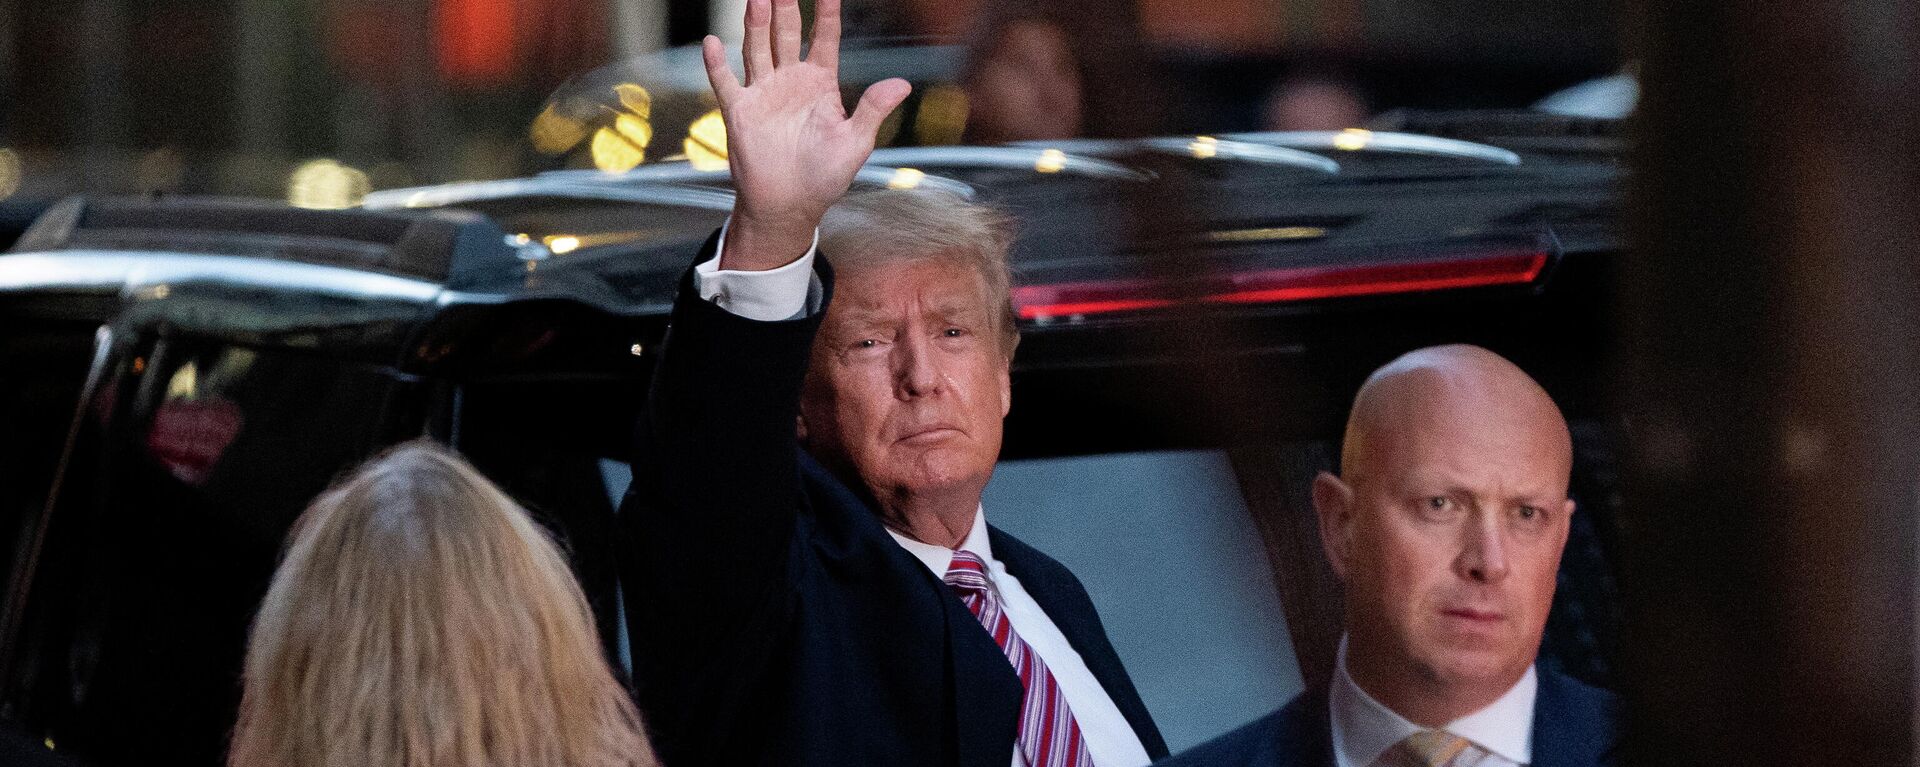 Former U.S. President Donald Trump acknowledges people as he gets in his SUV outside Trump Tower in the Manhattan borough of New York City, New York, U.S., October 18, 2021. - Sputnik International, 1920, 19.10.2021